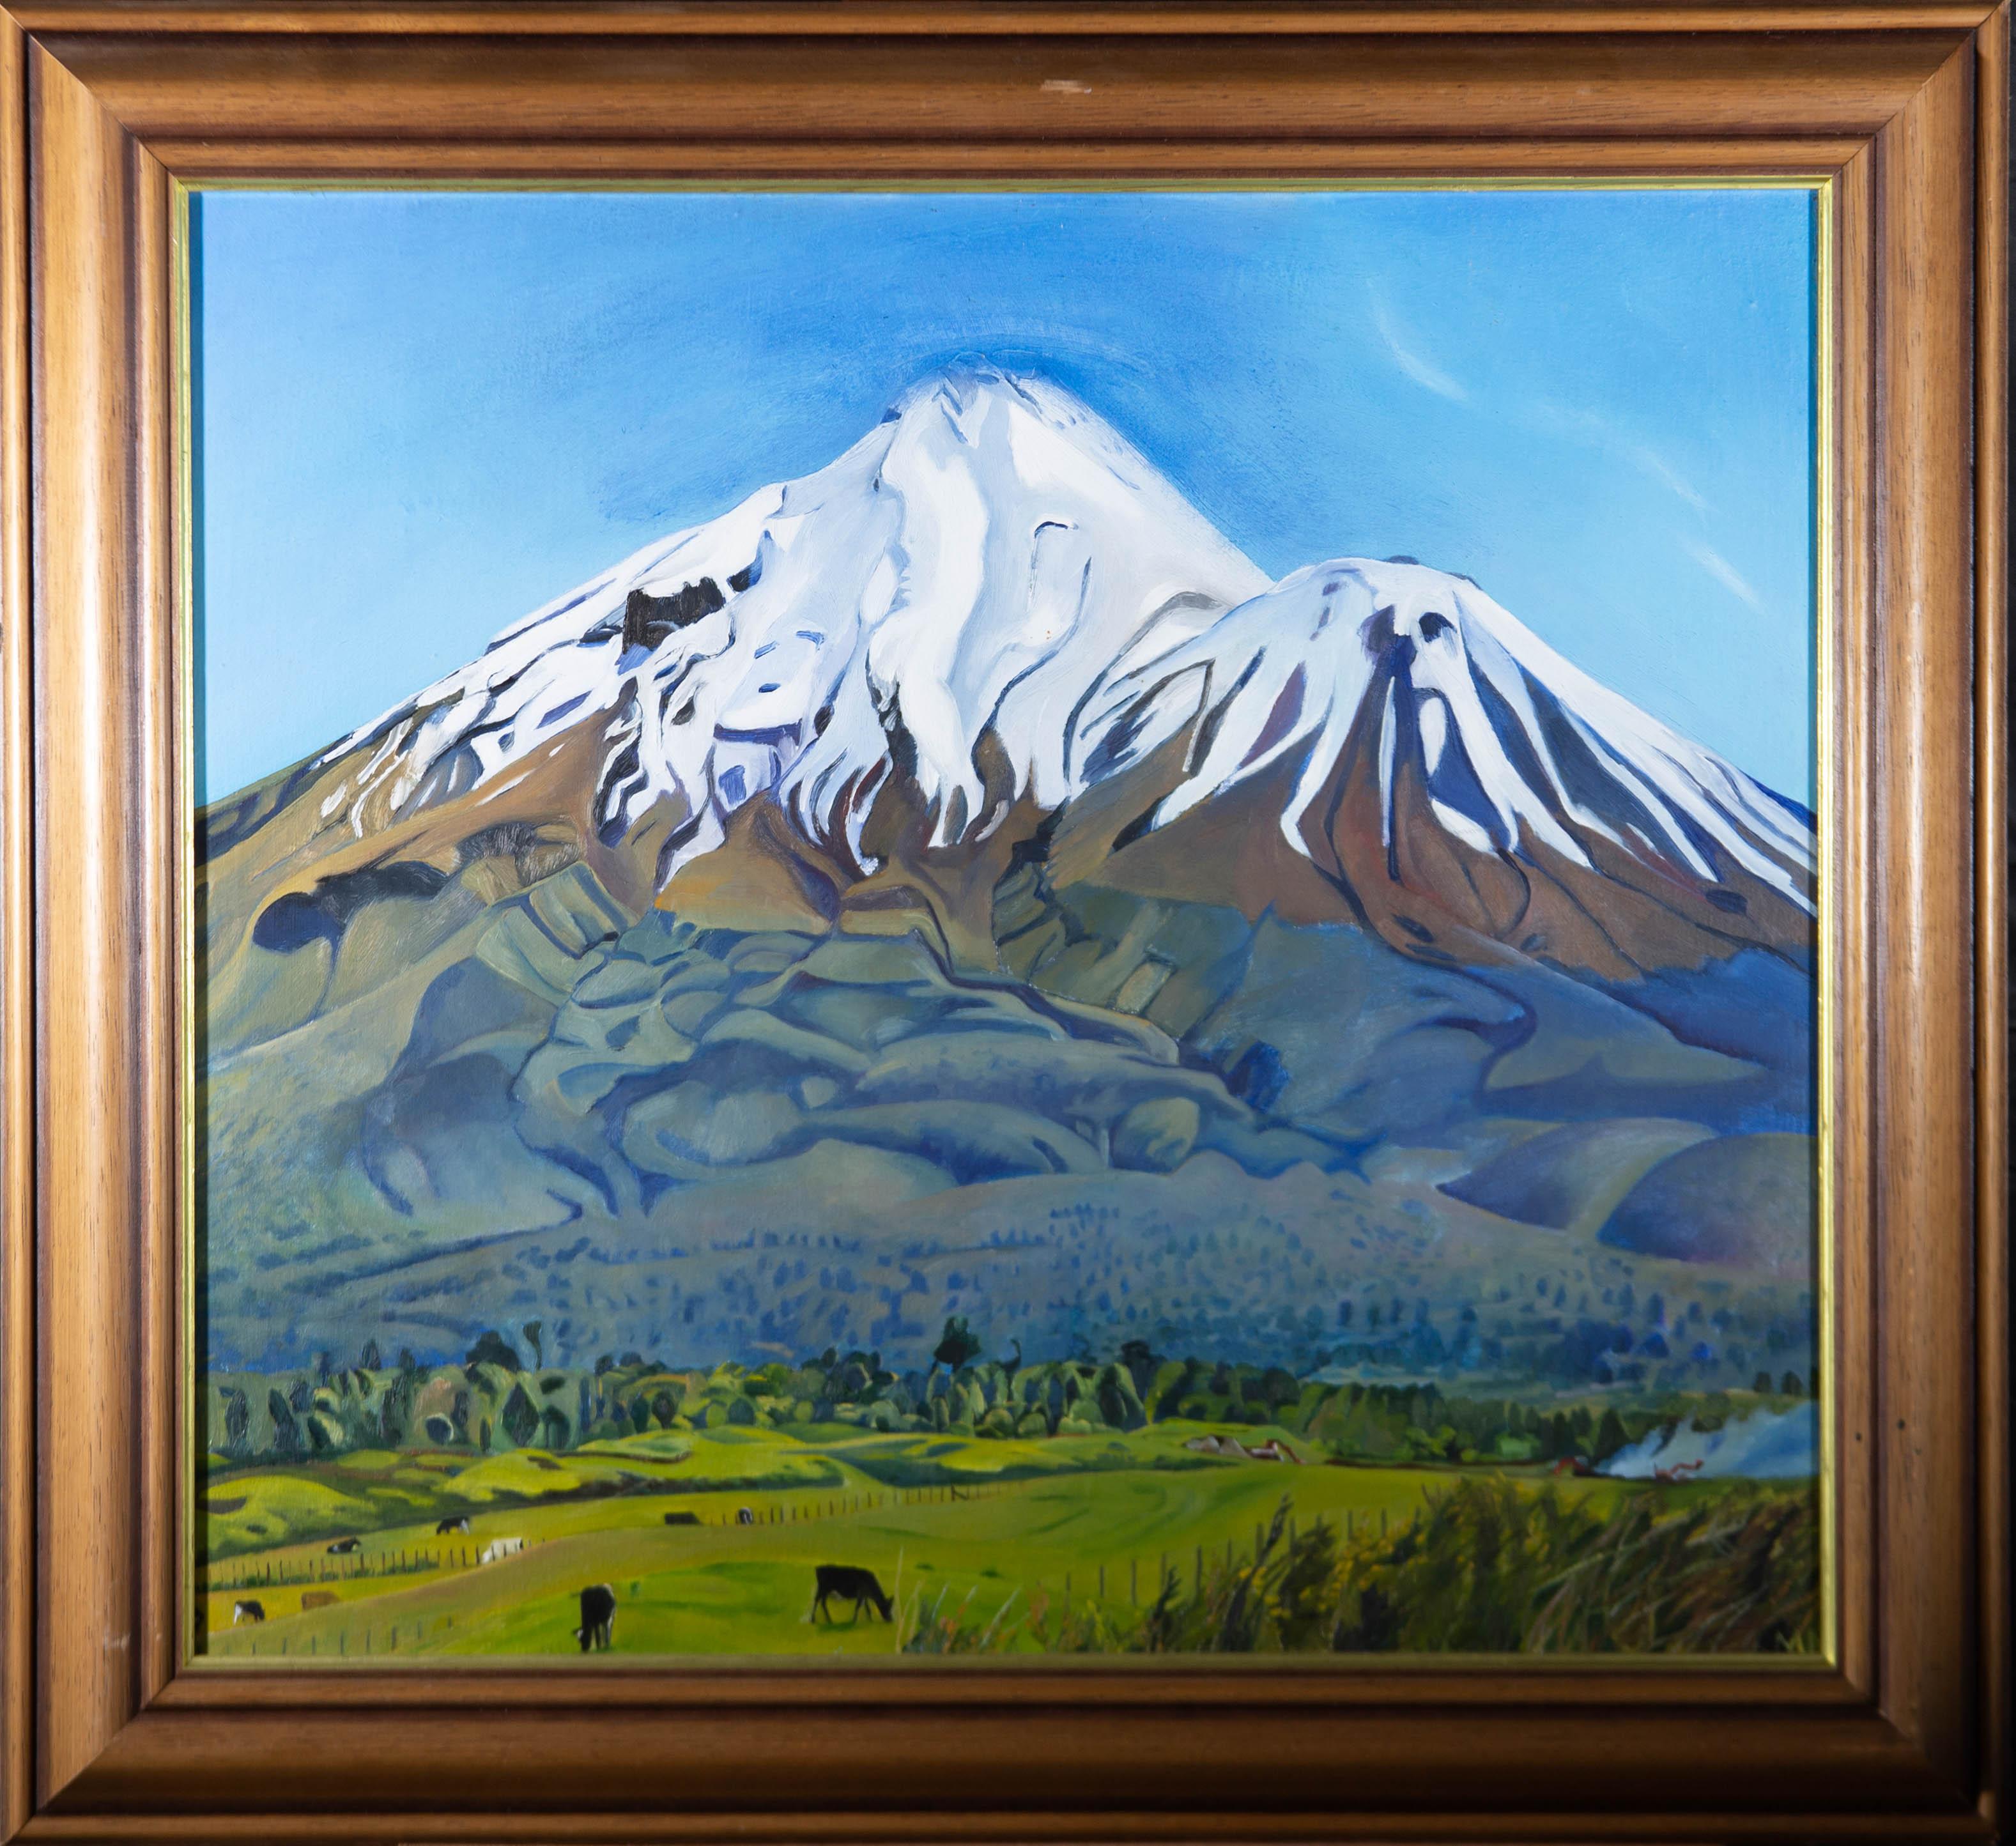 Framed Contemporary Oil - Alpine Mountain - Painting by Unknown